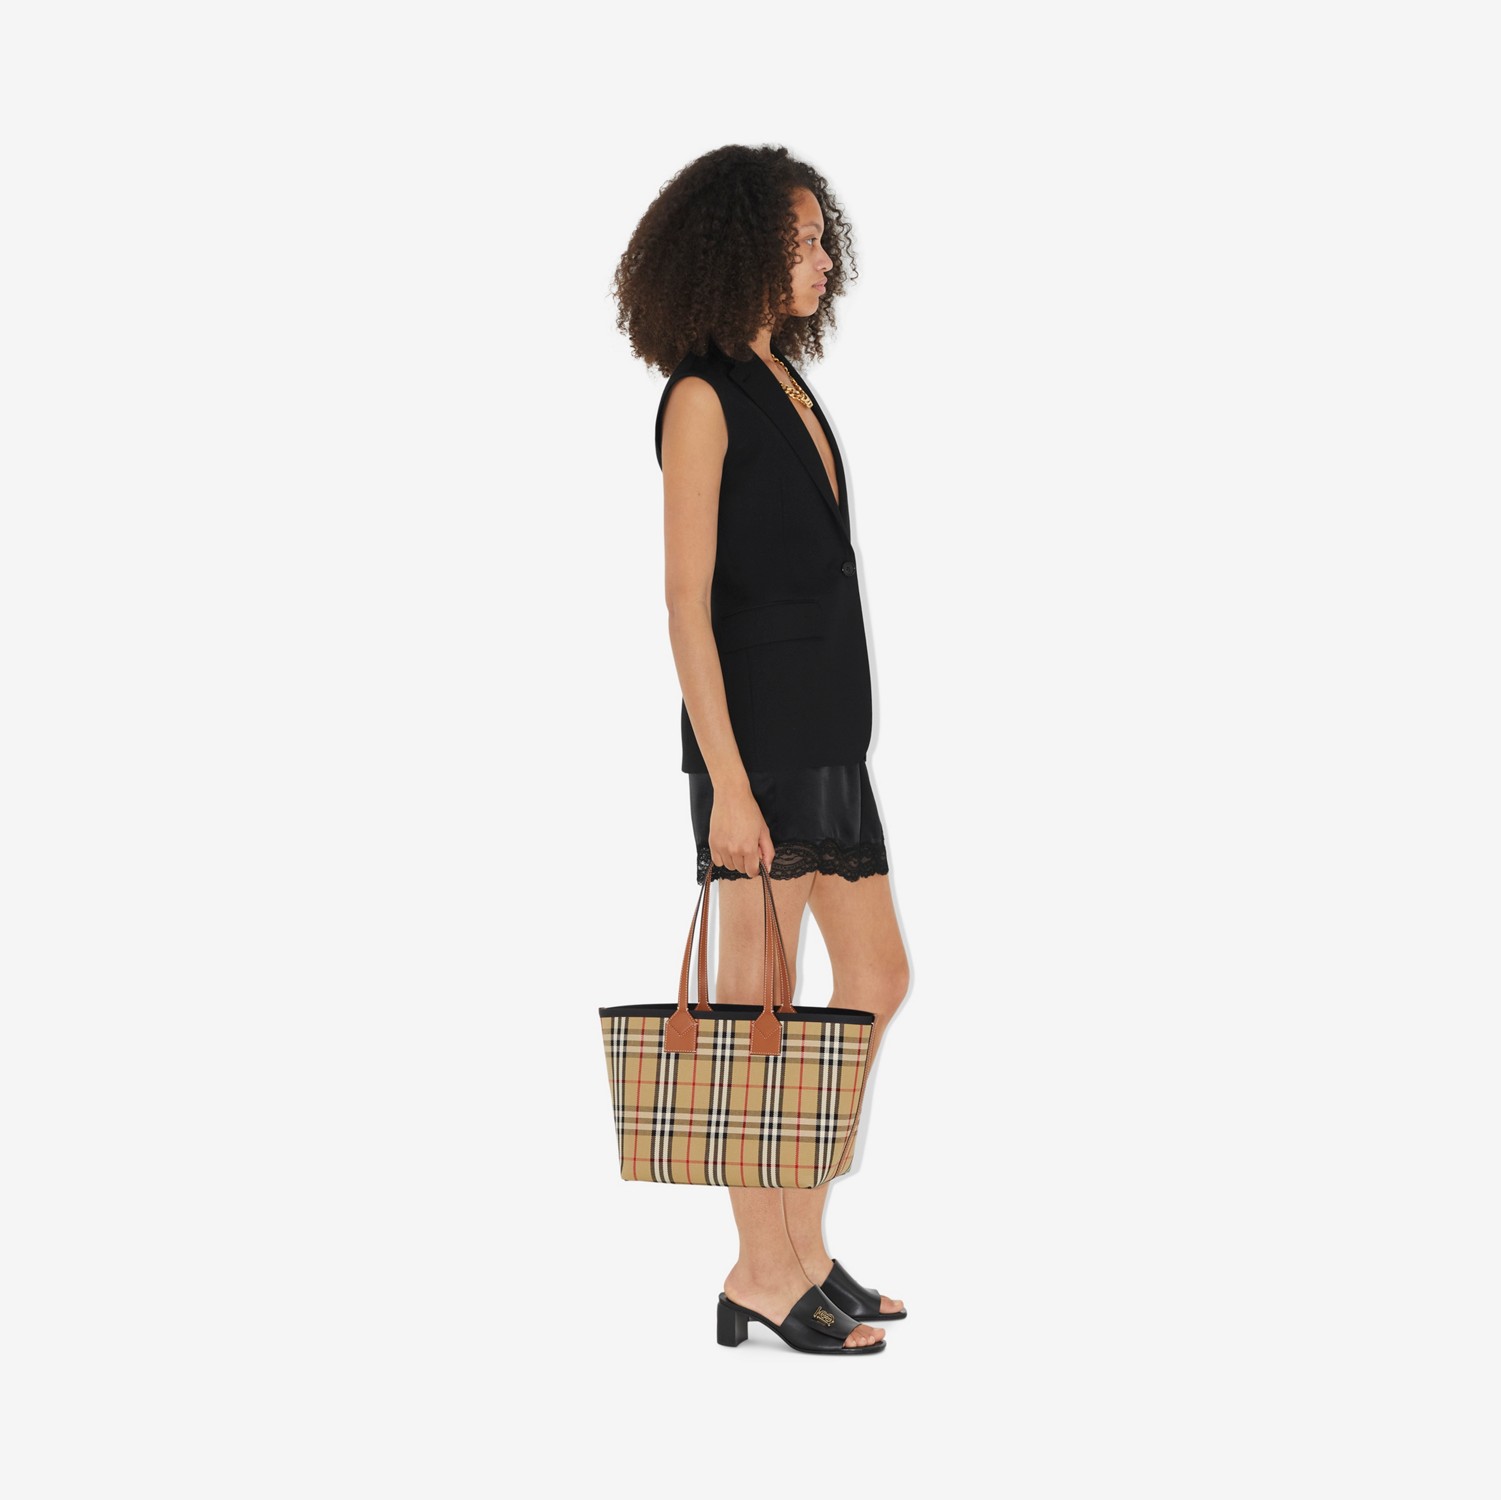 Small London Tote Bag in Briar Brown/black - Women | Burberry® Official